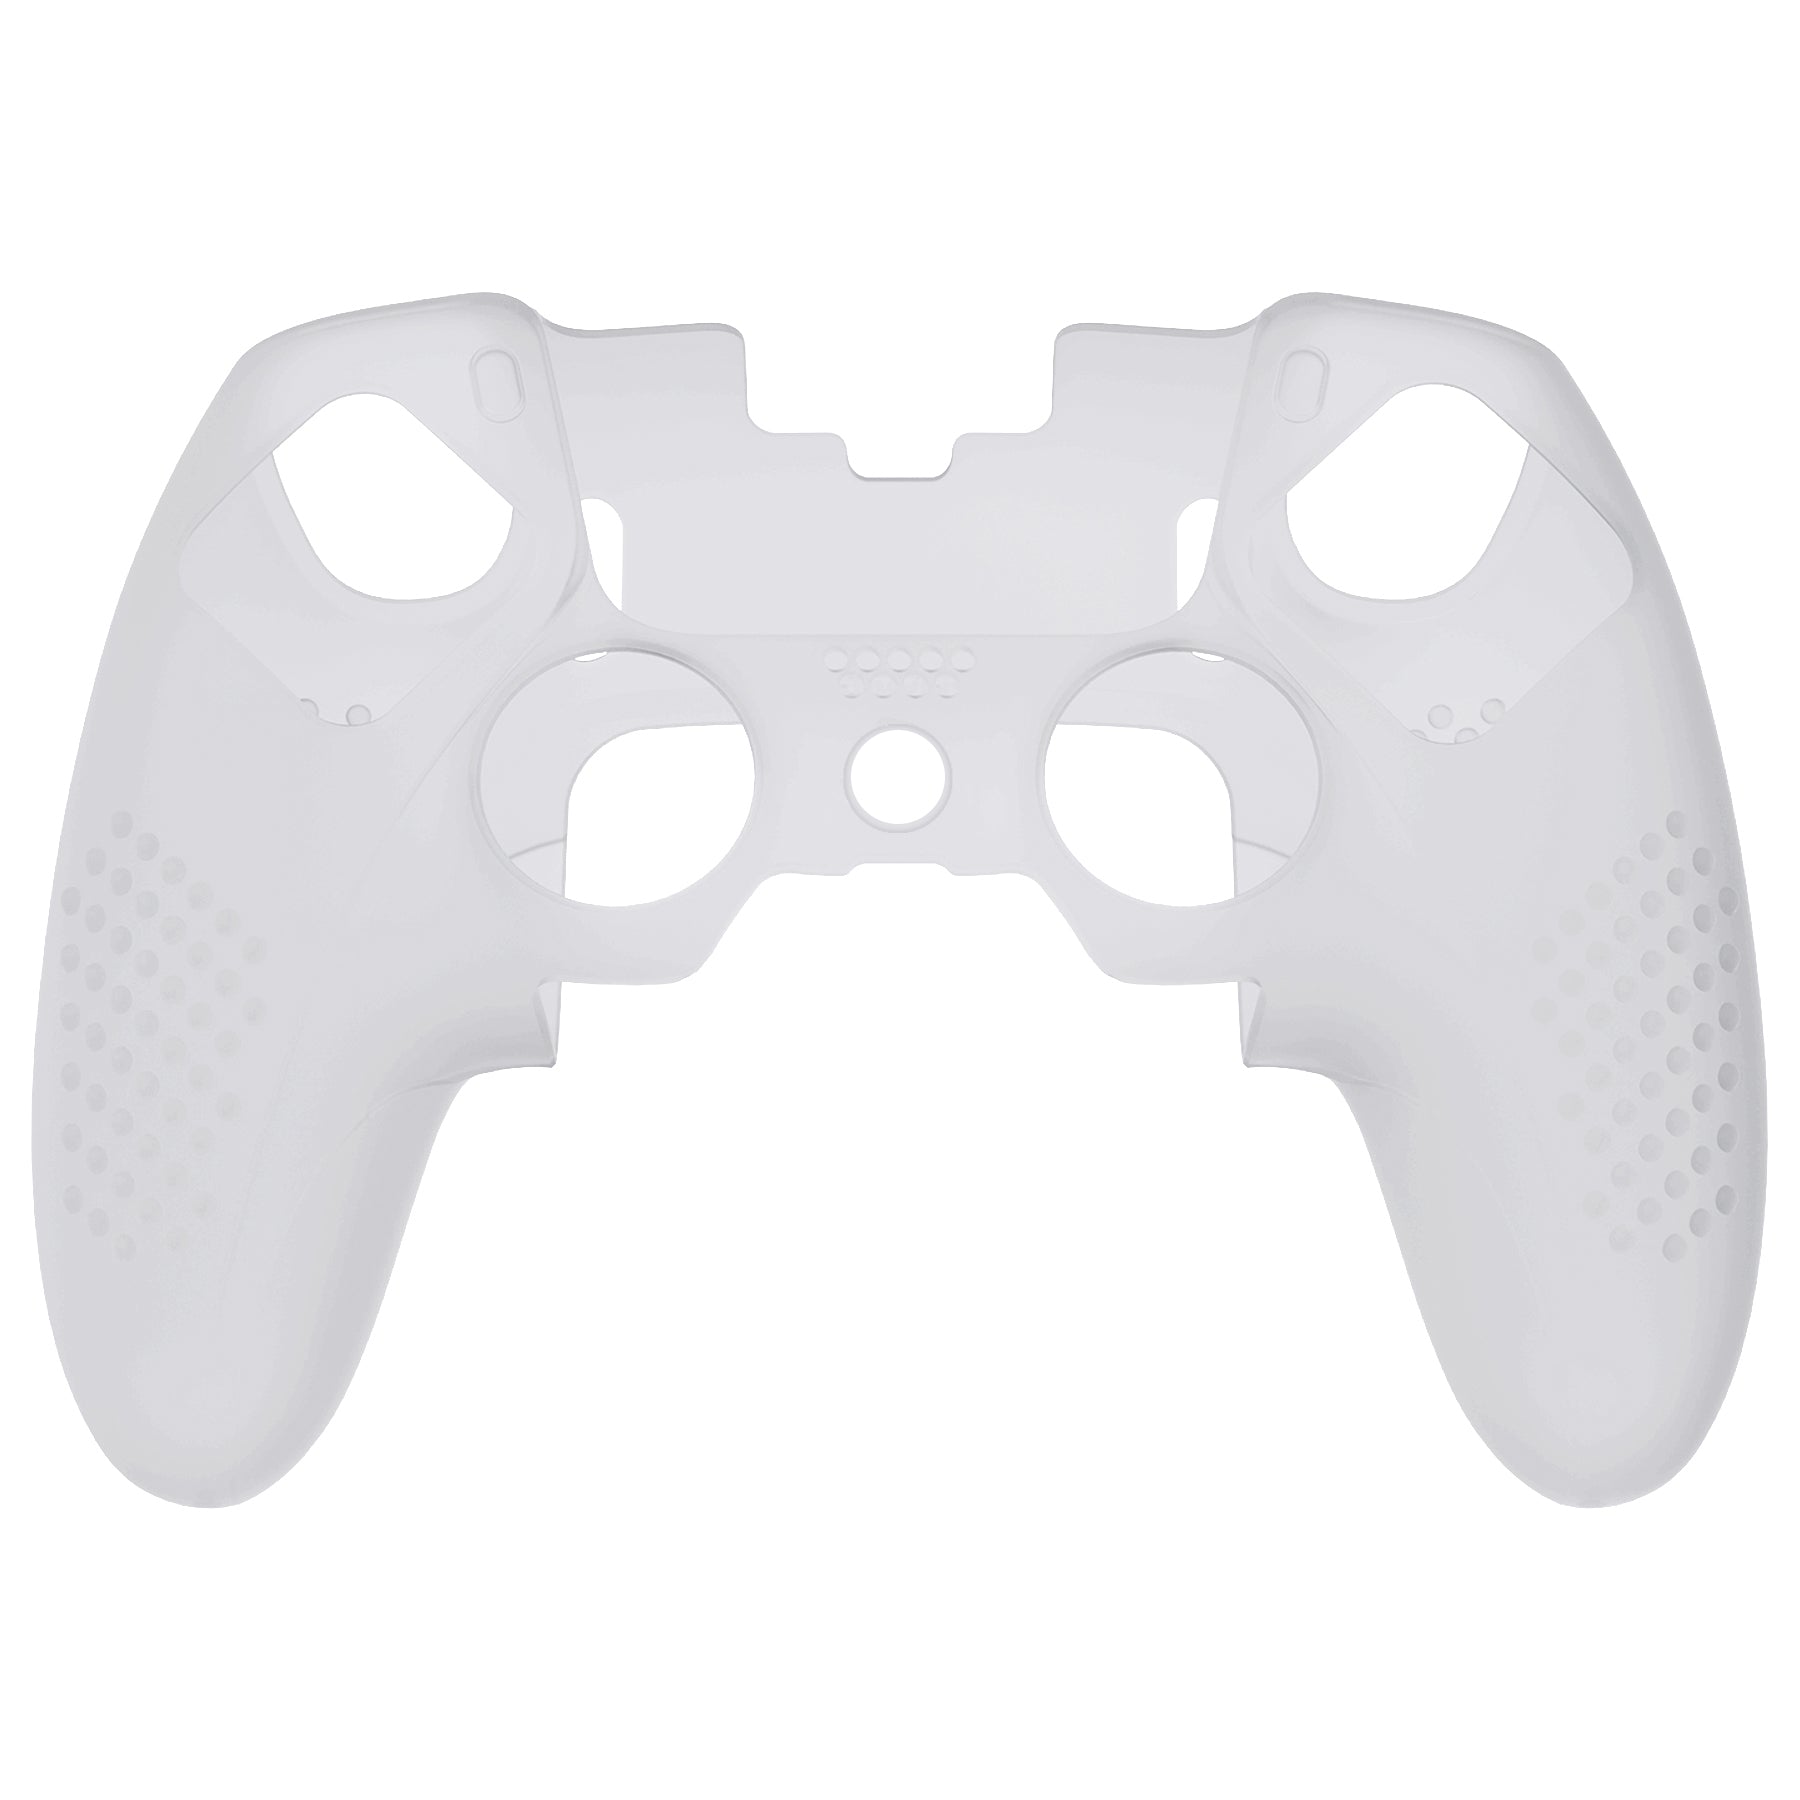 PlayVital 3D Studded Edition Anti-Slip Silicone Cover Case with Thumb Grip Caps for PS5 Edge Controller - Clear White - ETPFP003 PlayVital